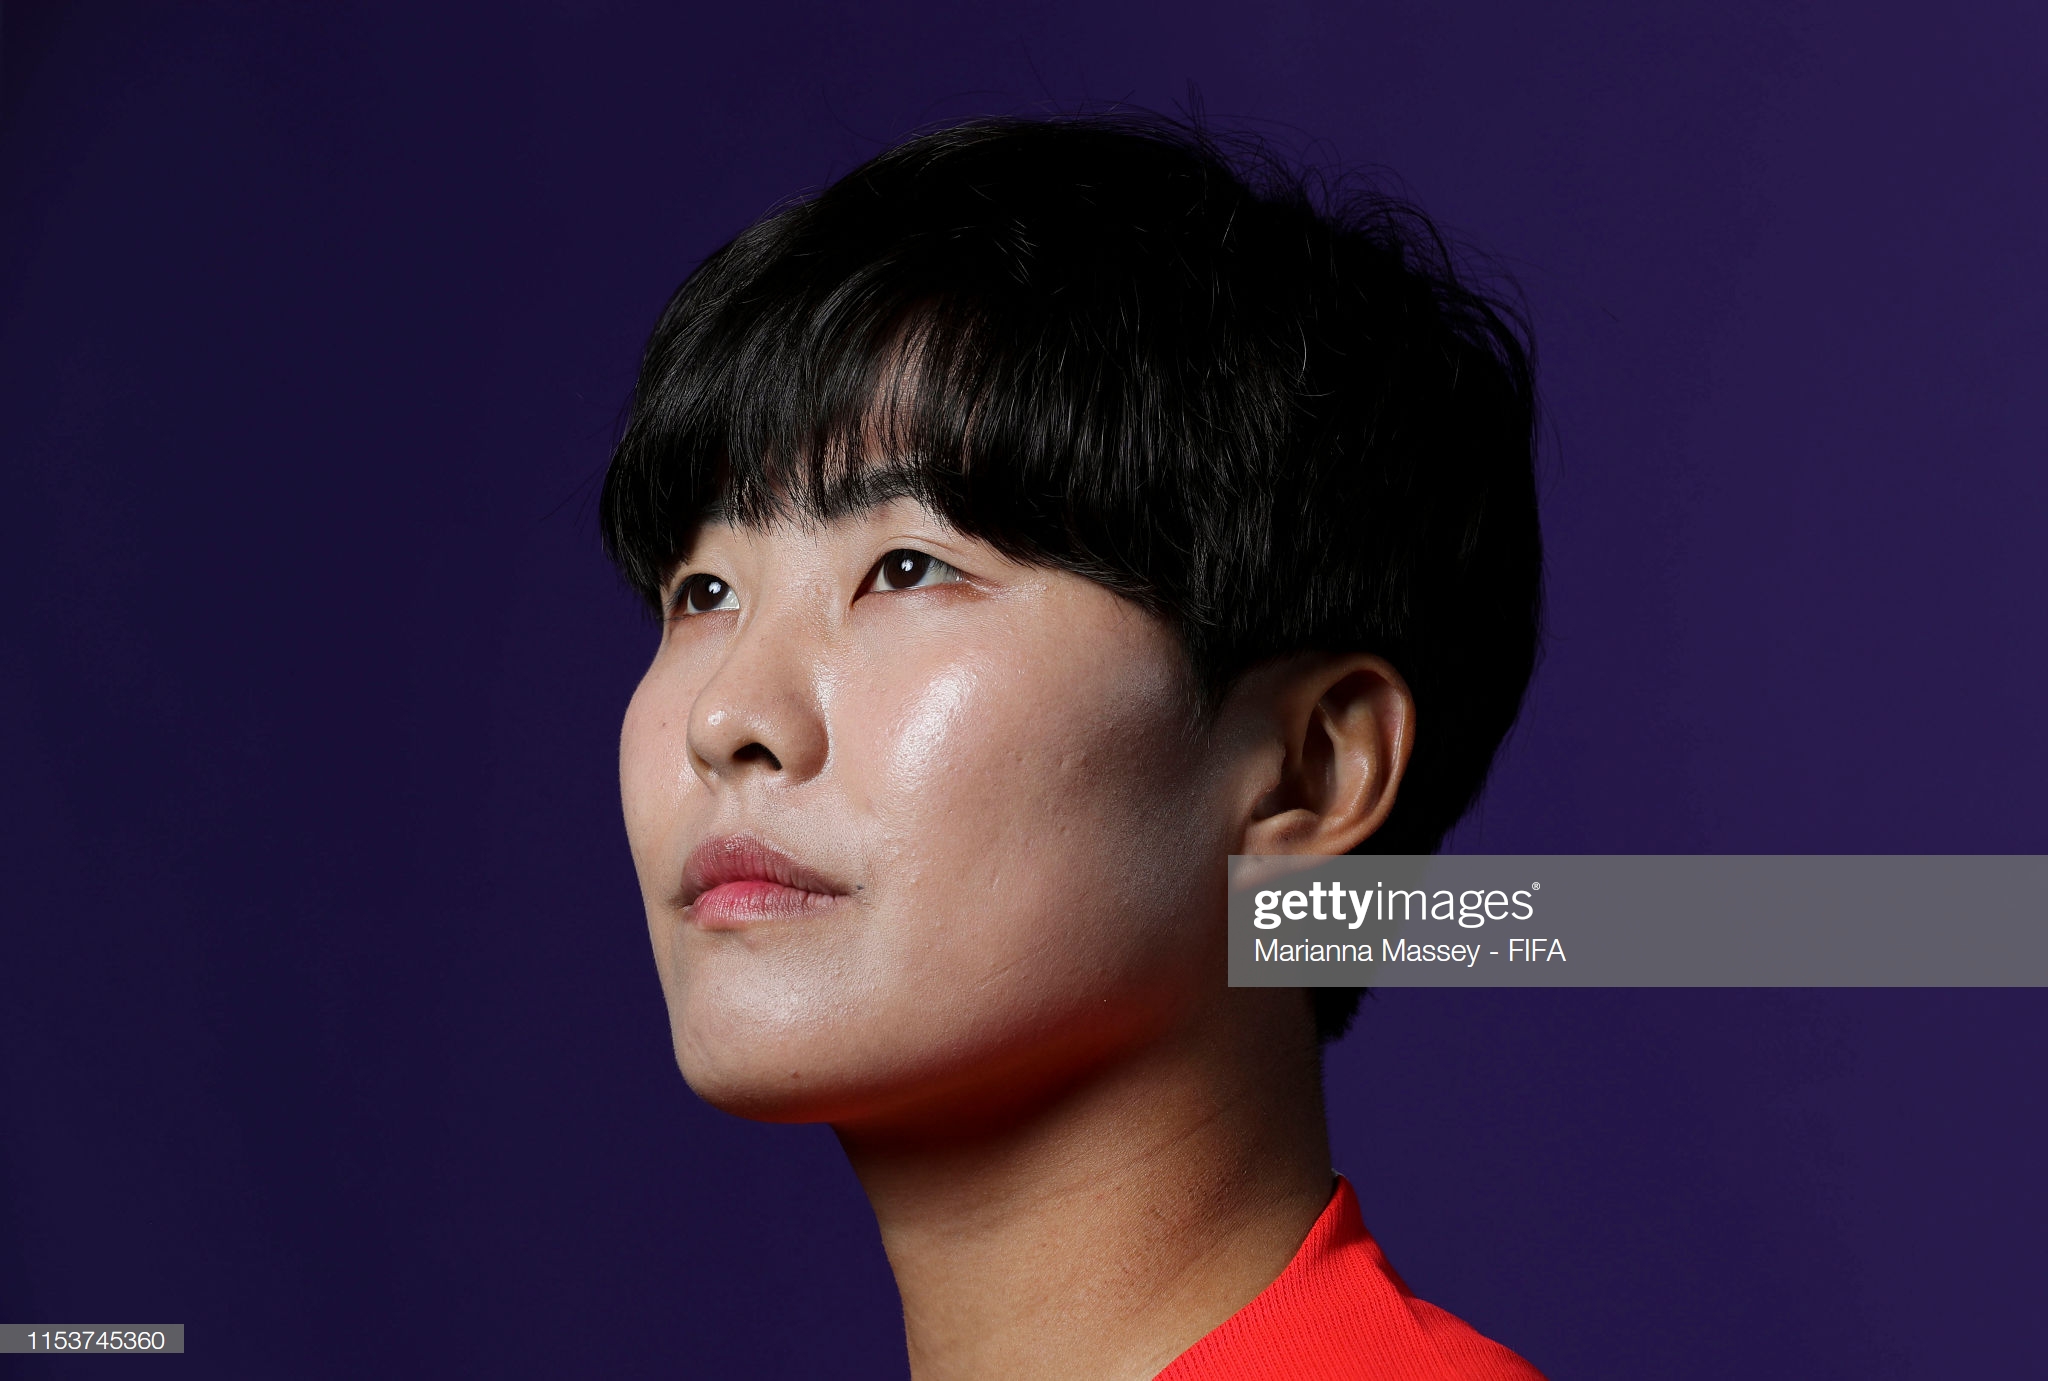 gettyimages-1153745360-2048x2048.jpg